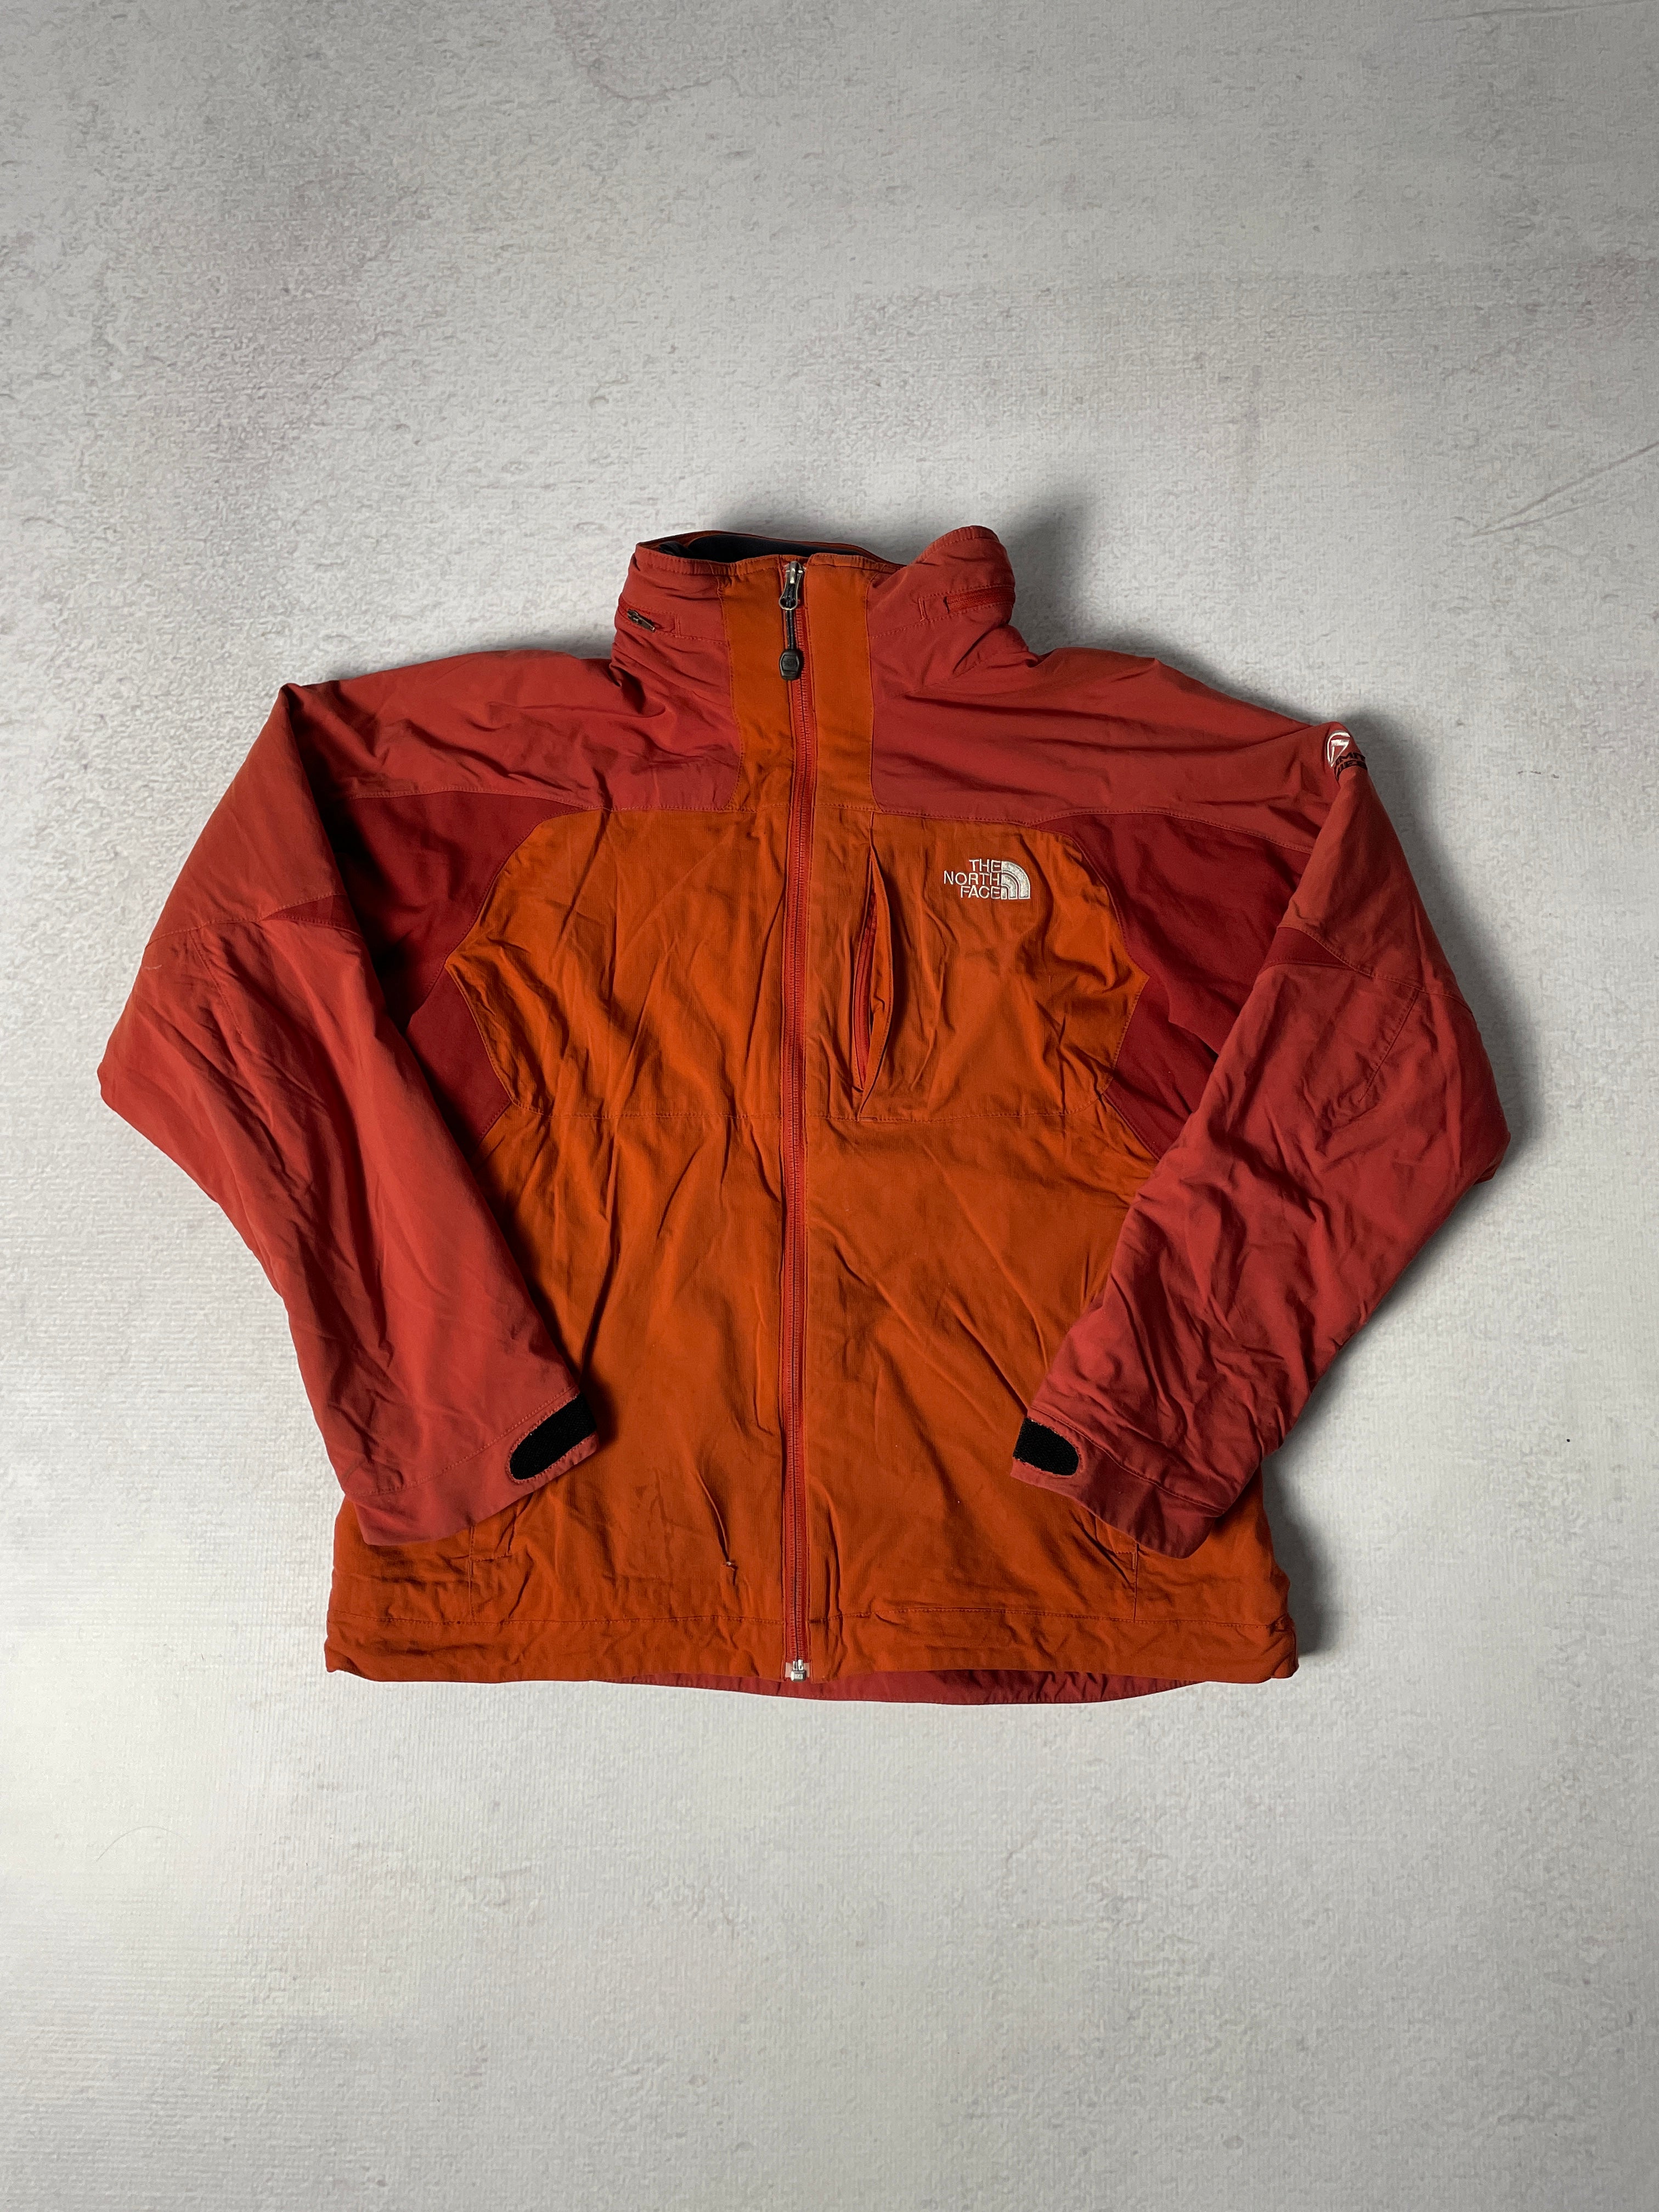 Vintage The North Face Summit Series Insulated Jacket - Women's Medium